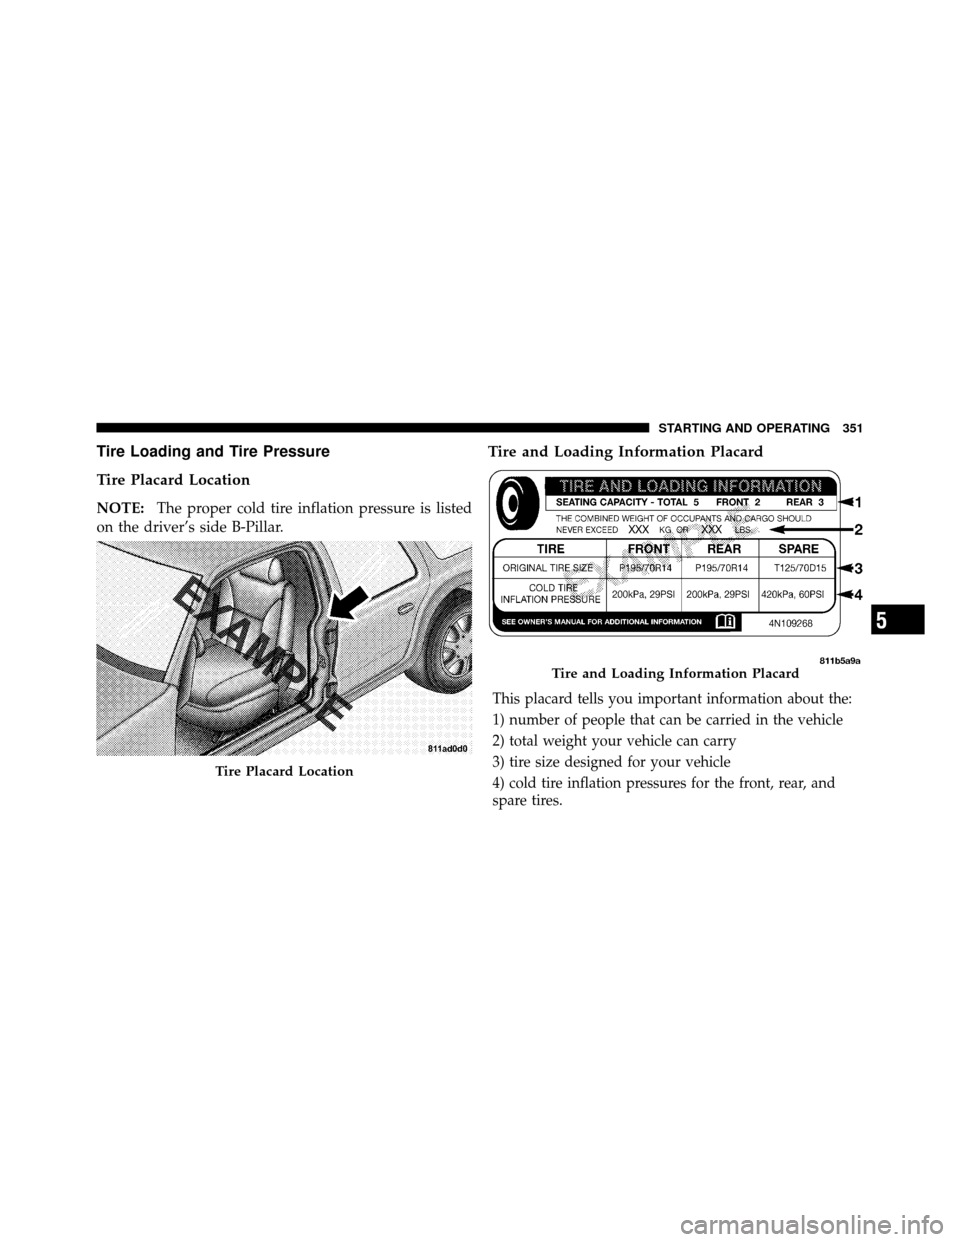 CHRYSLER 300 2010 1.G Owners Manual Tire Loading and Tire Pressure
Tire Placard Location
NOTE:The proper cold tire inflation pressure is listed
on the driver’s side B-Pillar.
Tire and Loading Information Placard
This placard tells you